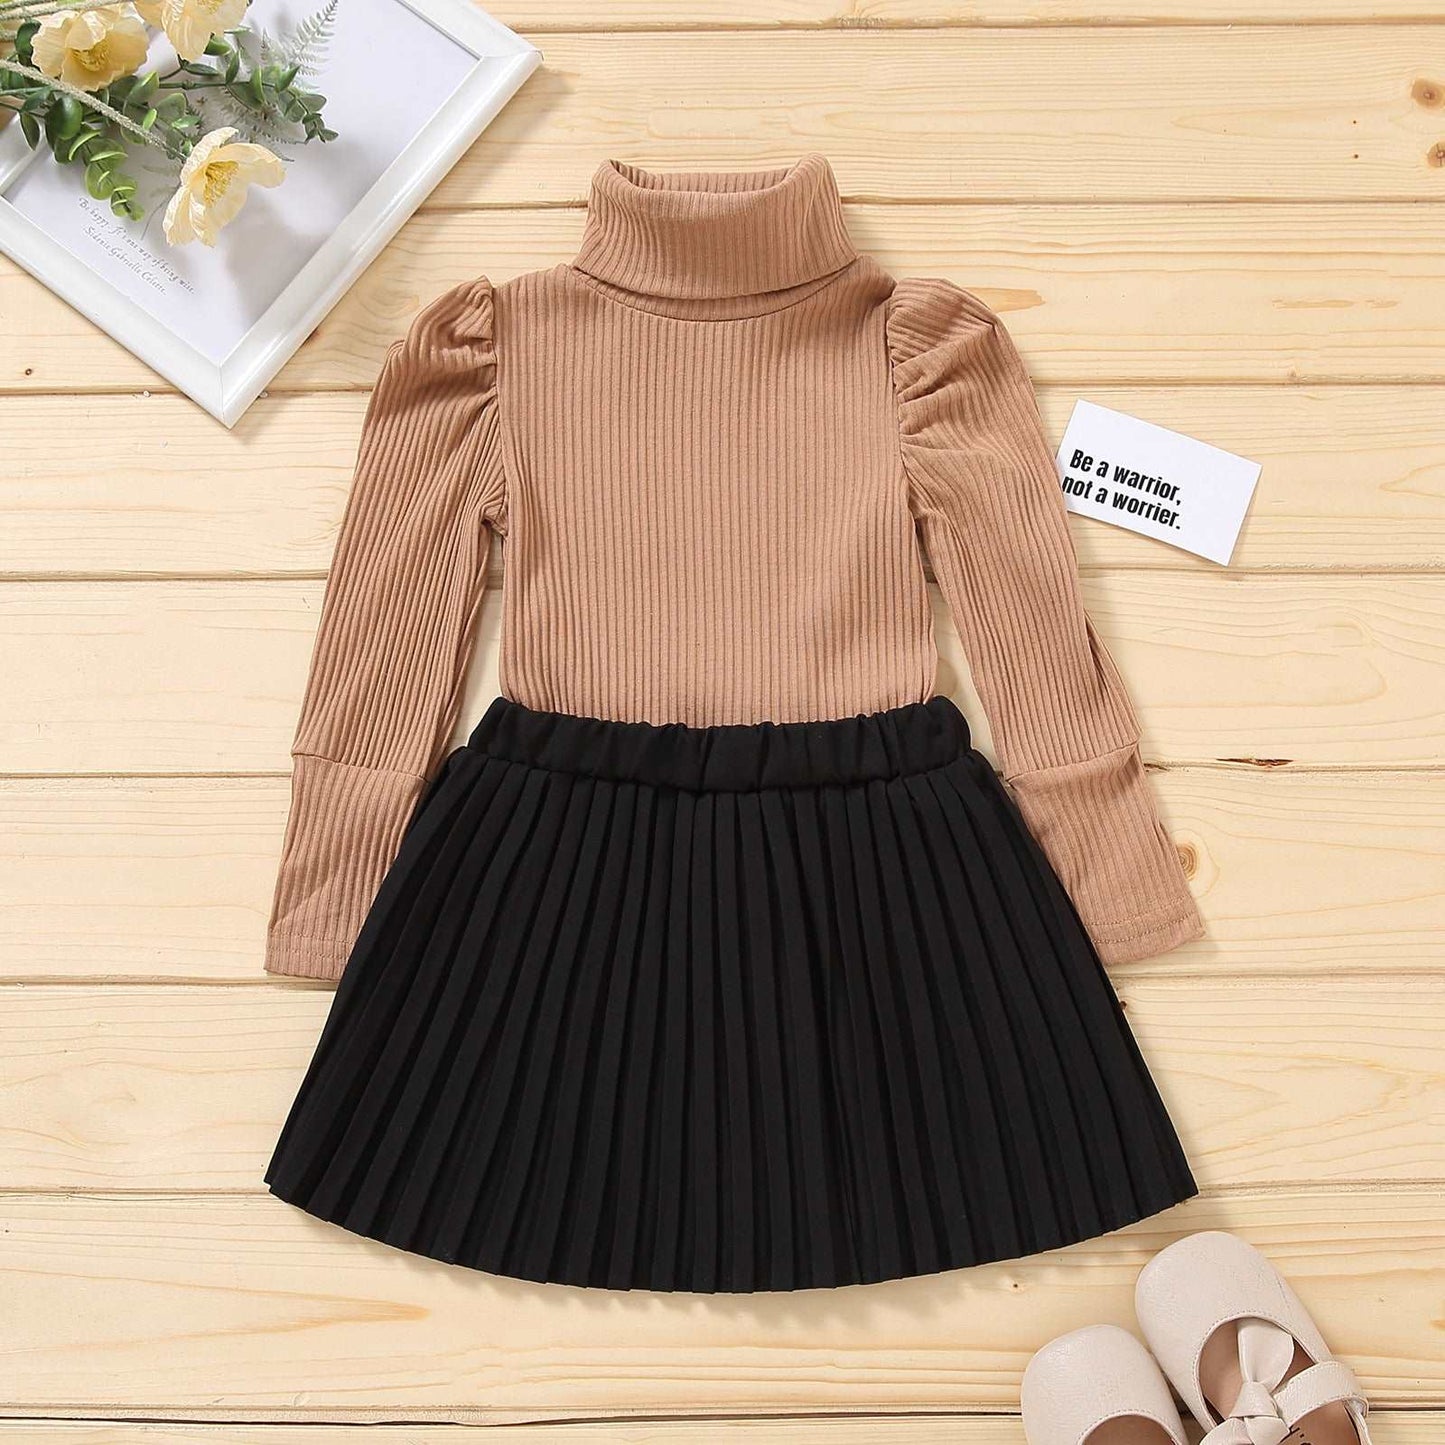 Kids Fall Skirts And Turtleneck Outfit Kids clothes